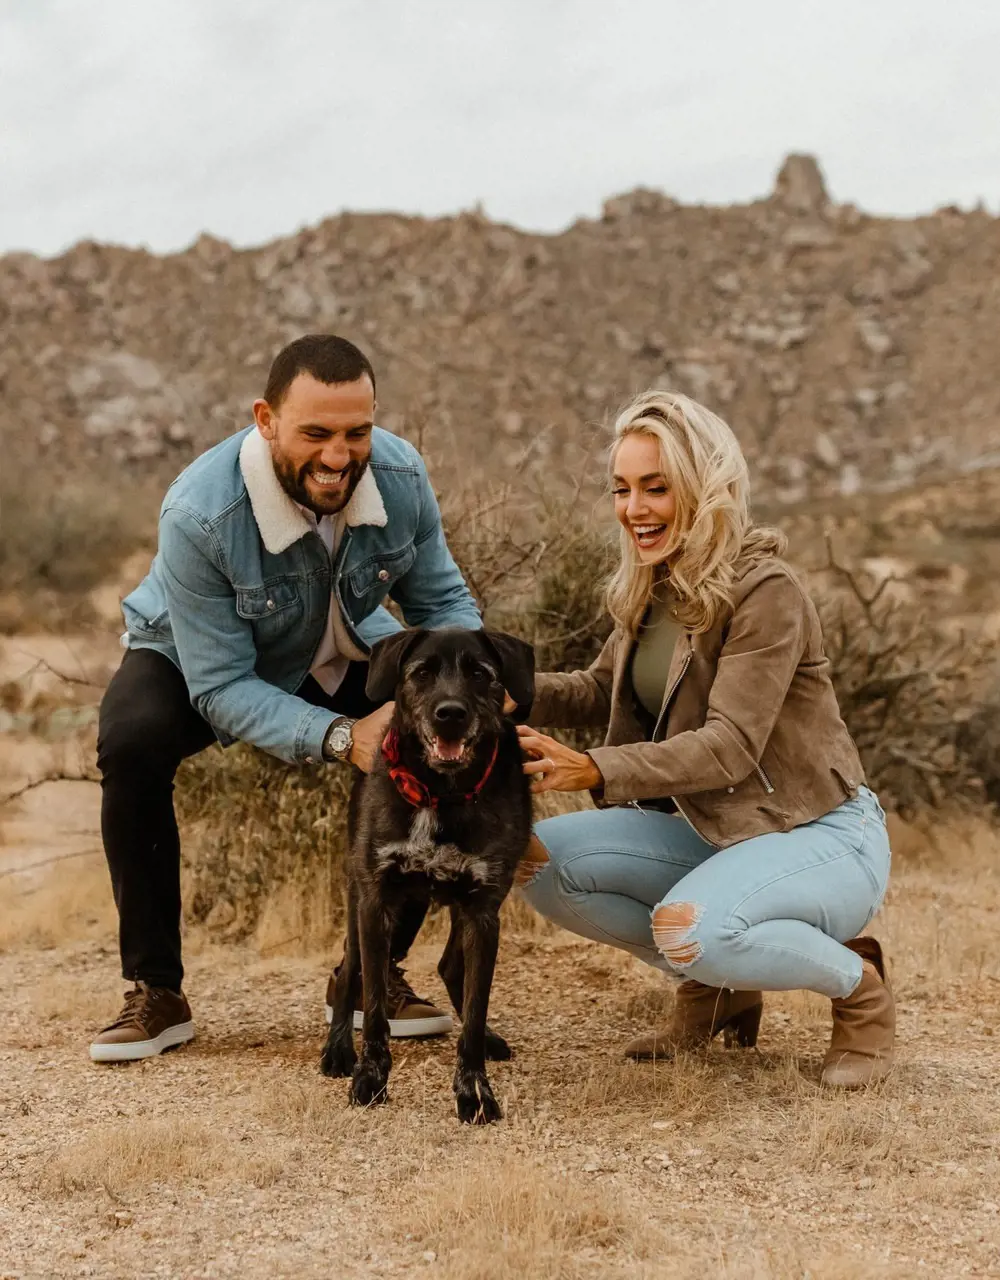 Paul had a wonderful time with Abigail and their dog Finnegan [Credit: Ali Boundy Photography]